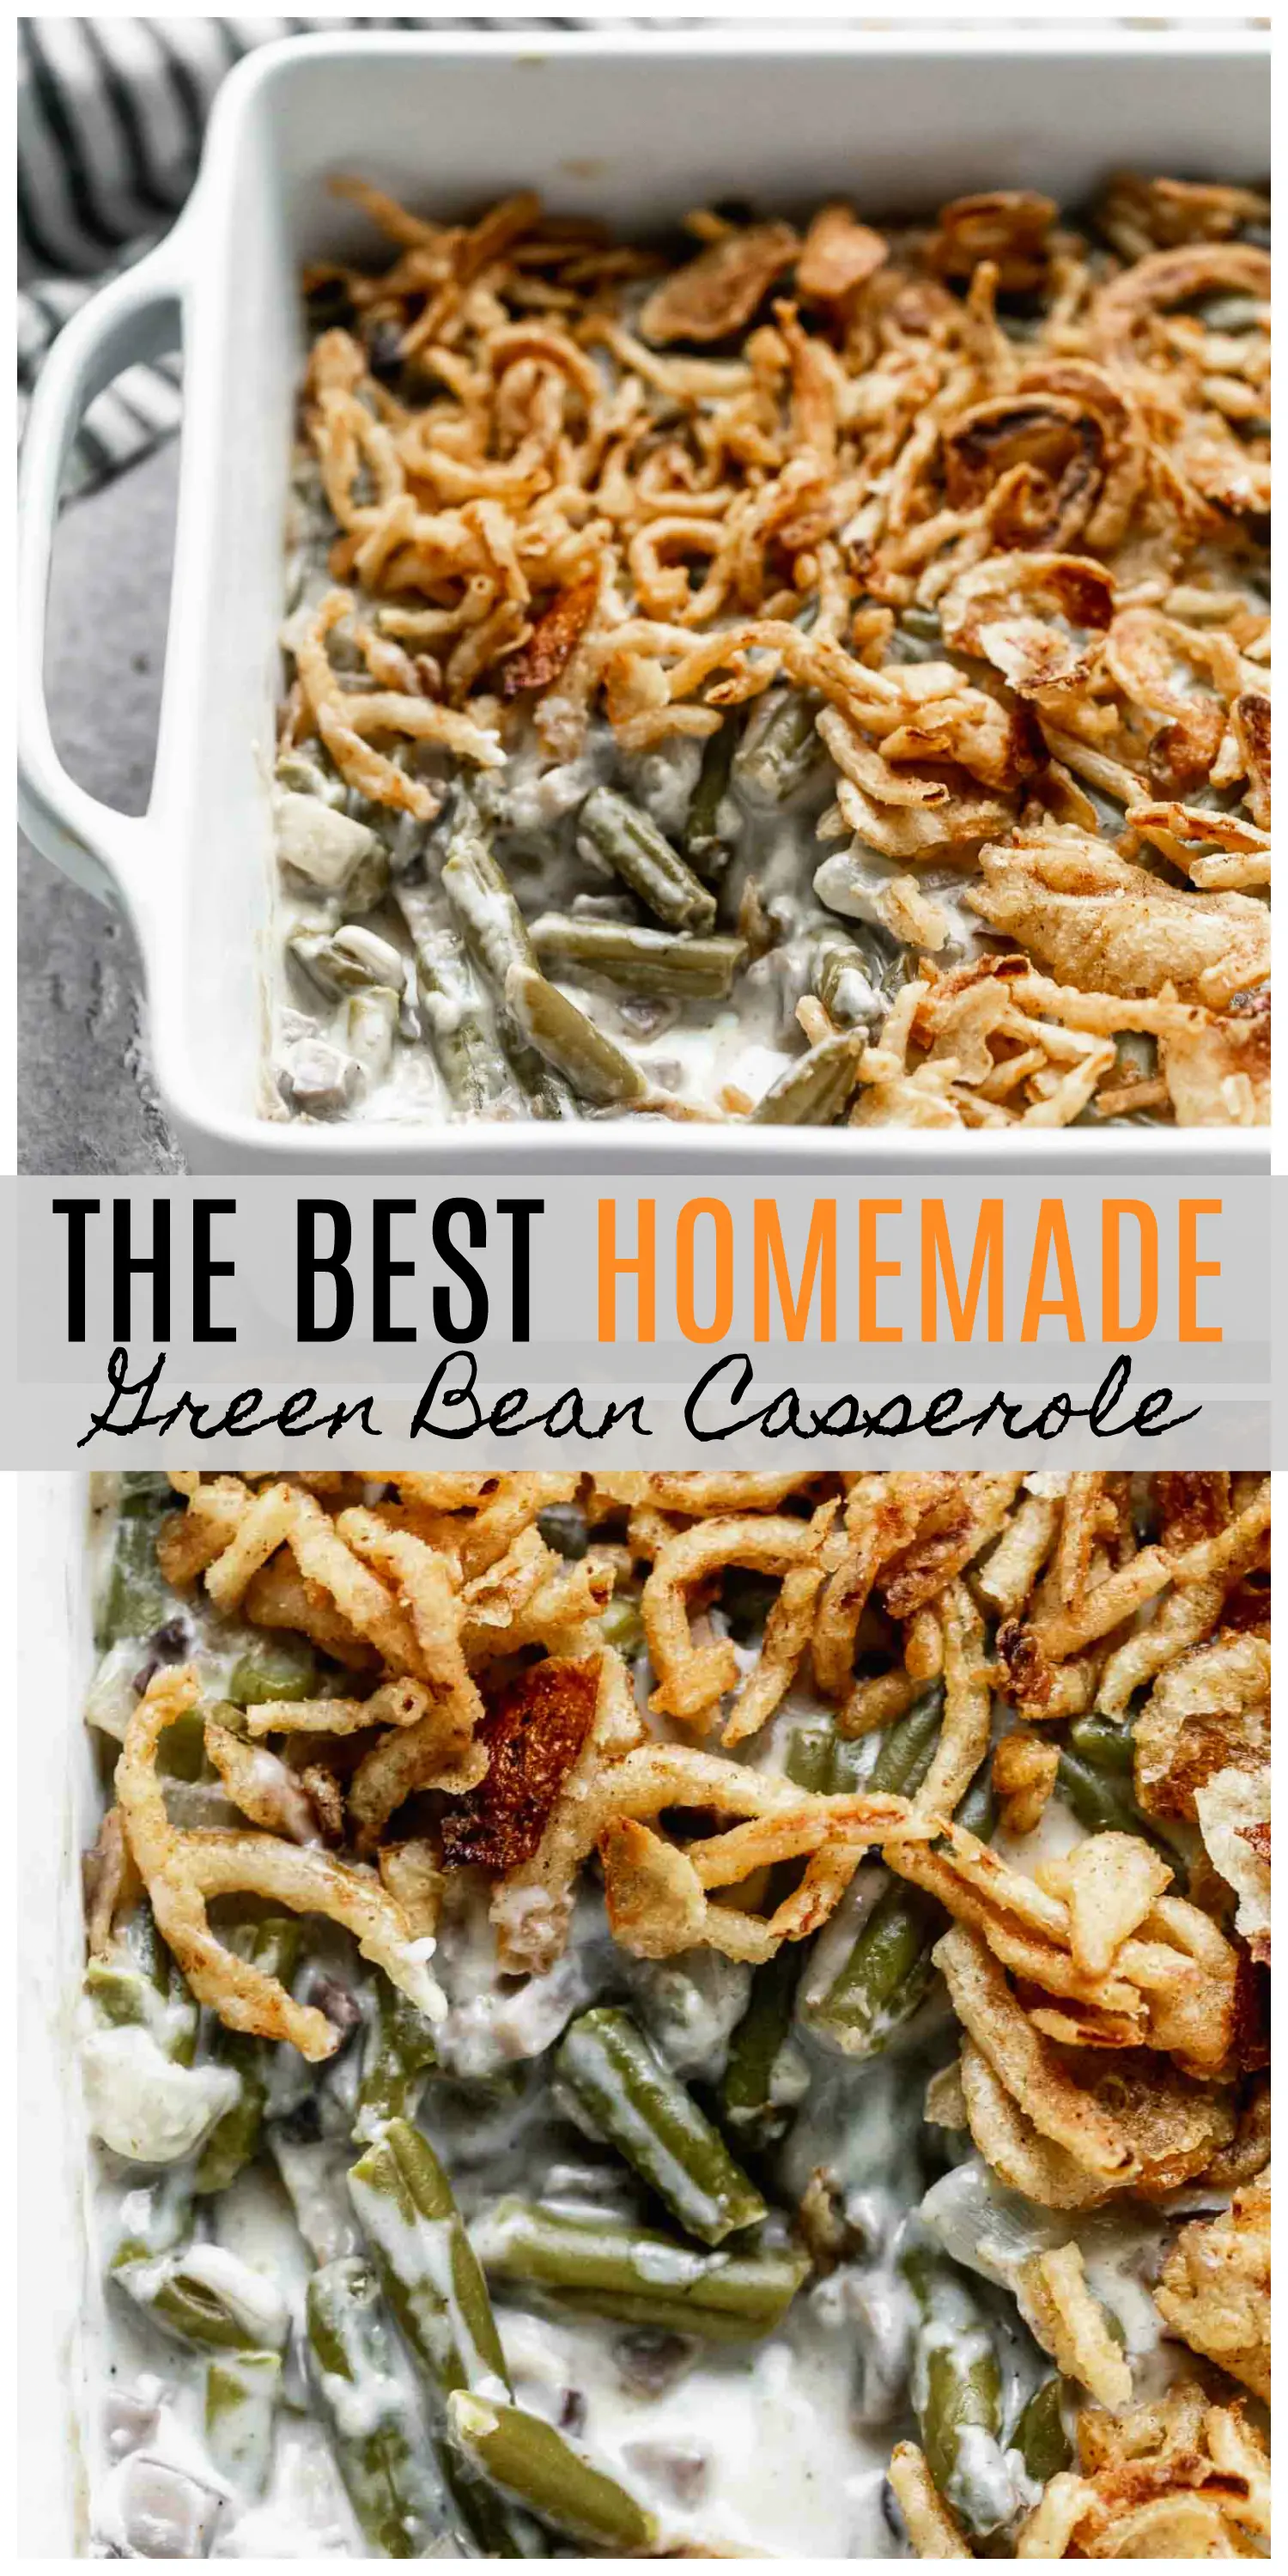 The BEST Homemade Green Bean Casserole - SO easy and no cream of mushroom soup!